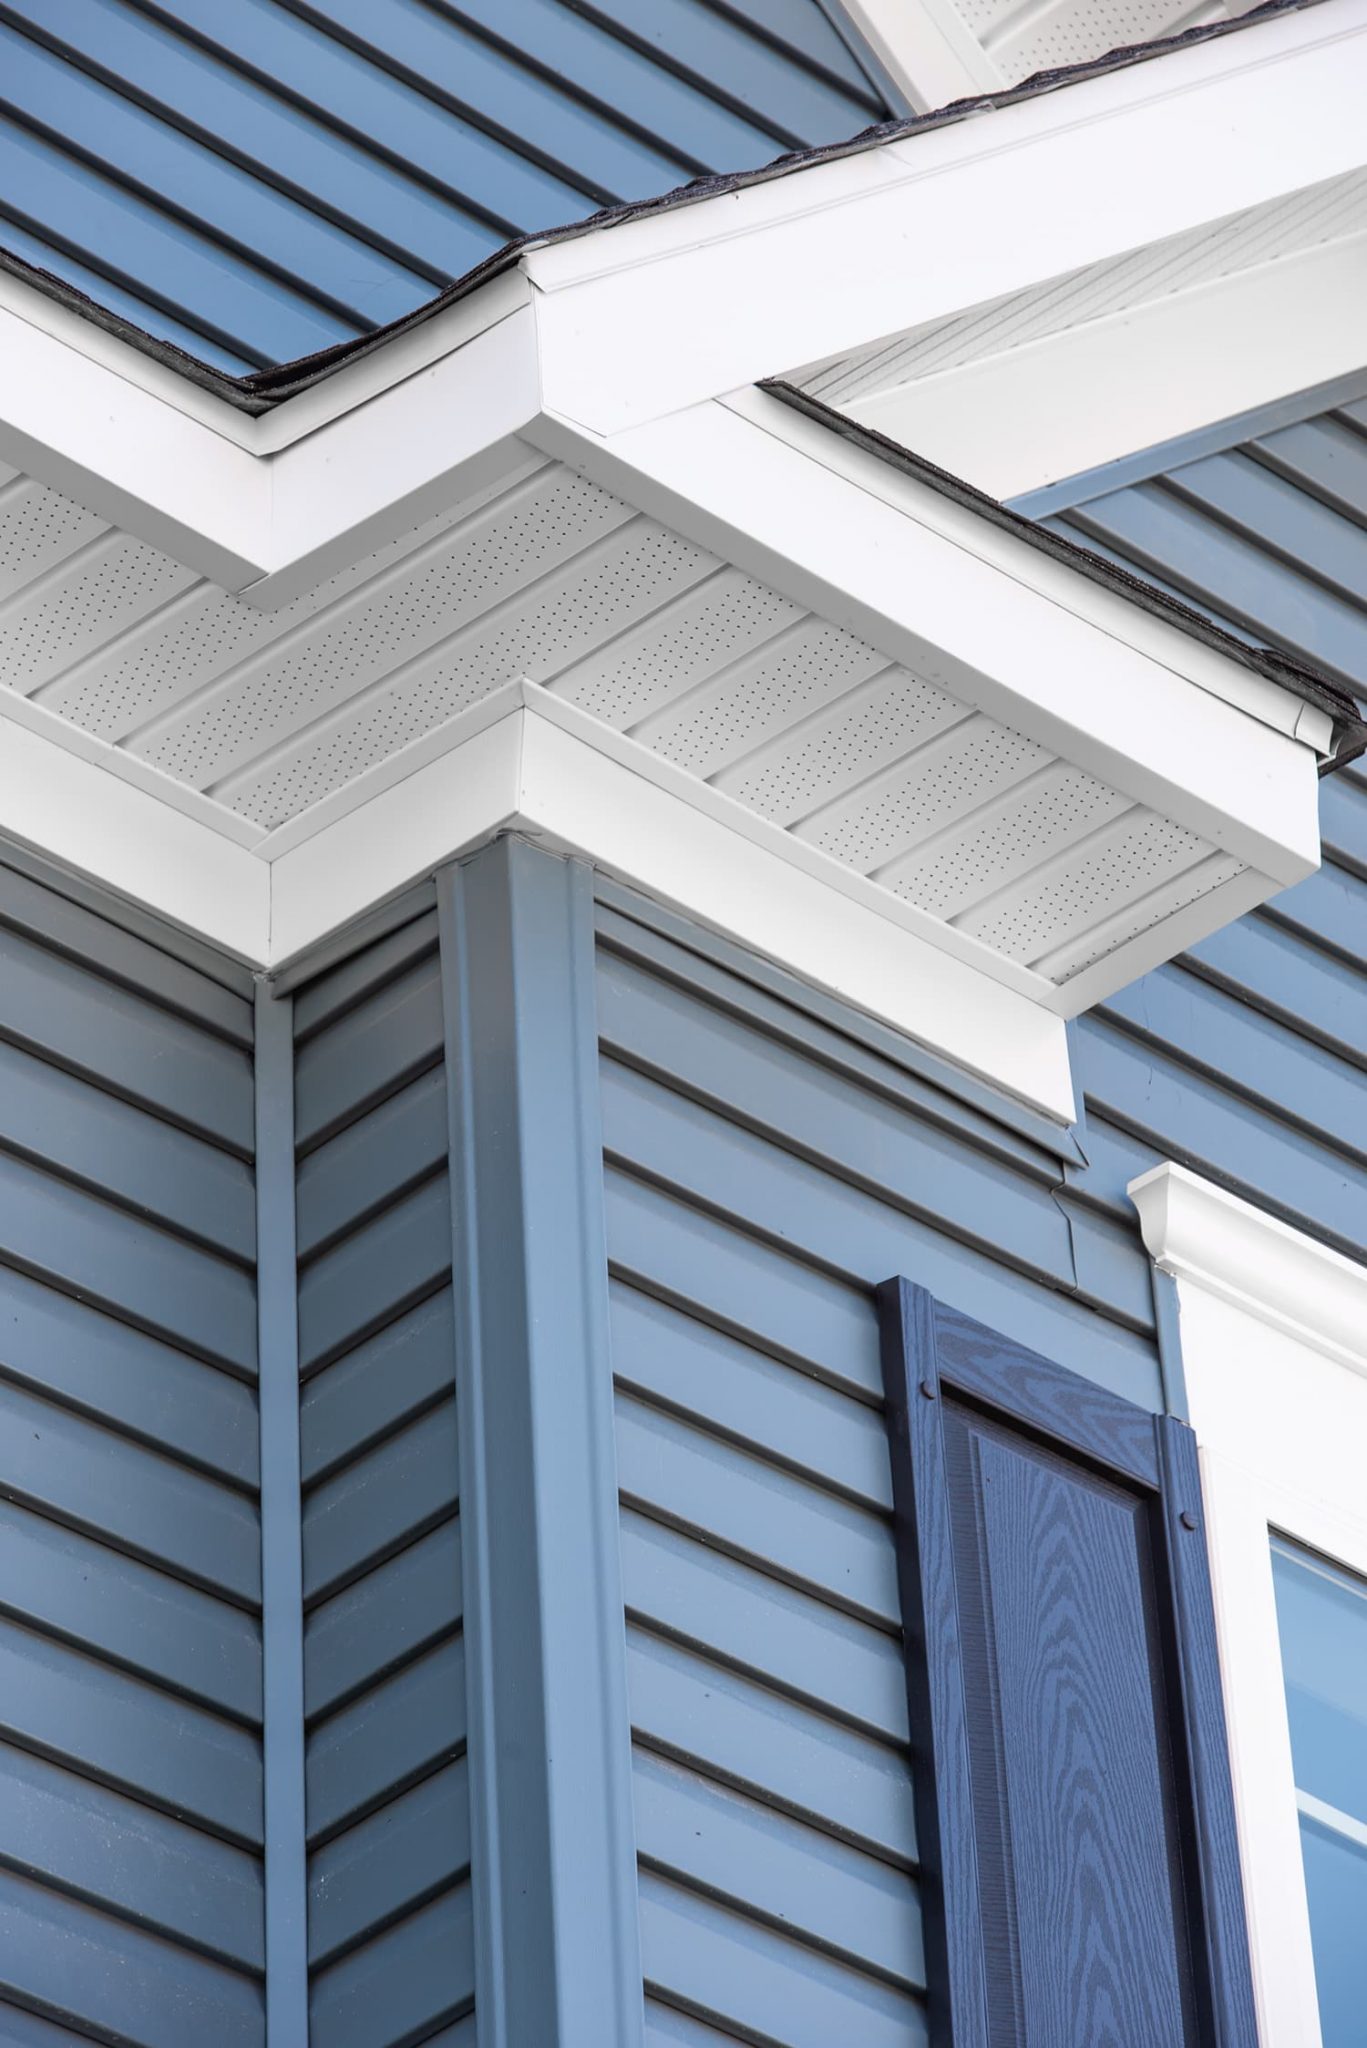 7 Vinyl Siding Trends that Will Make Your Home Beautiful in 2022